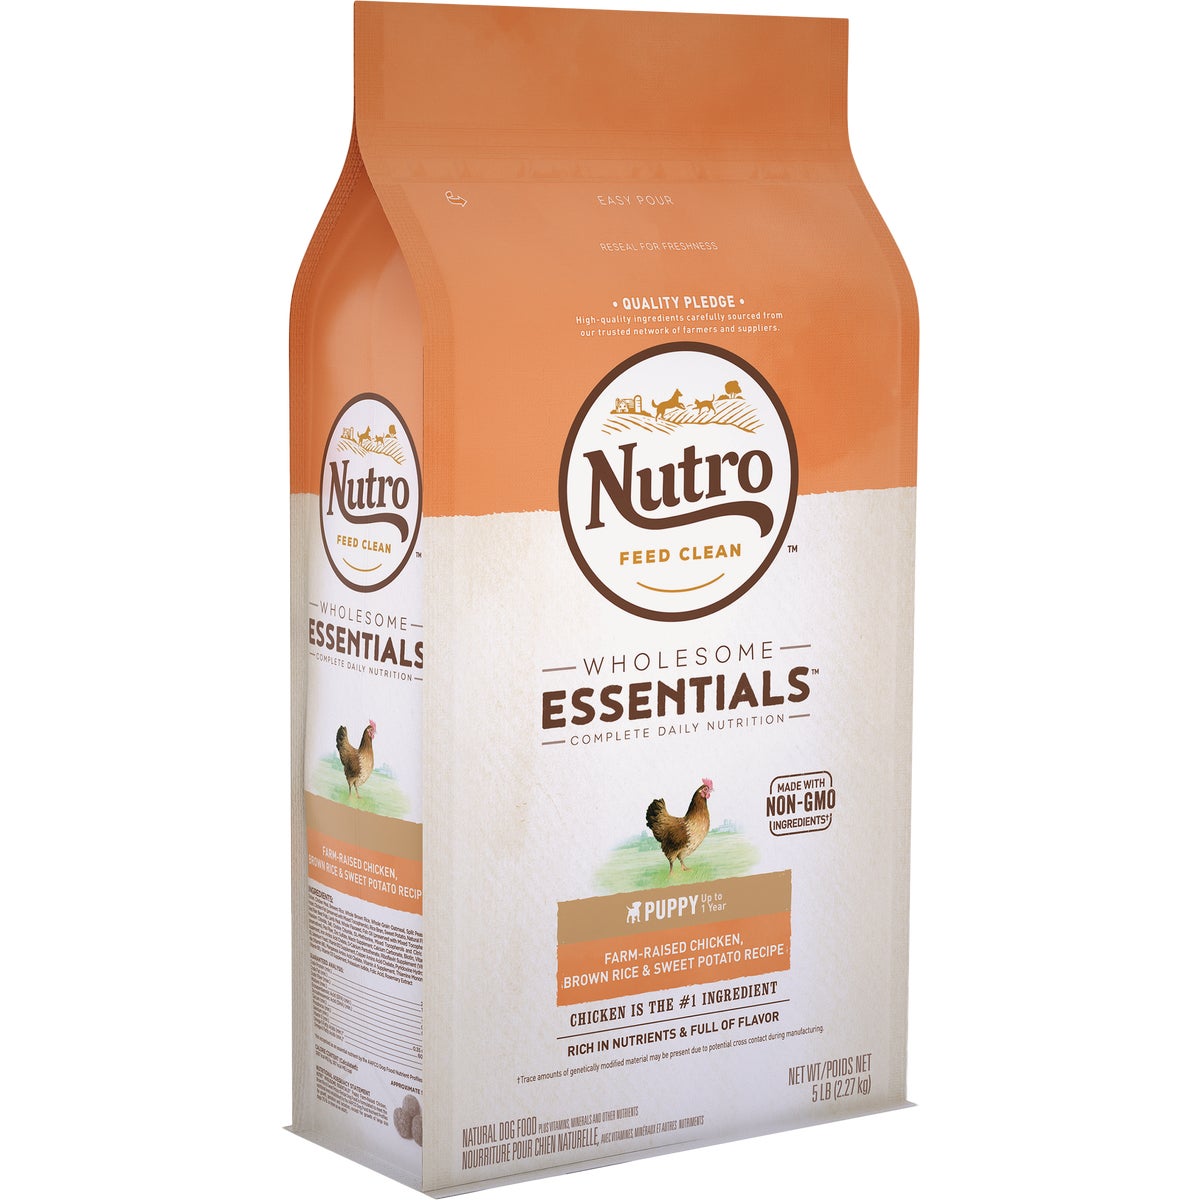 Nutro Wholesome Essentials 5 Lb. Chicken, Brown Rice, & Sweet Potato Dry Puppy Food